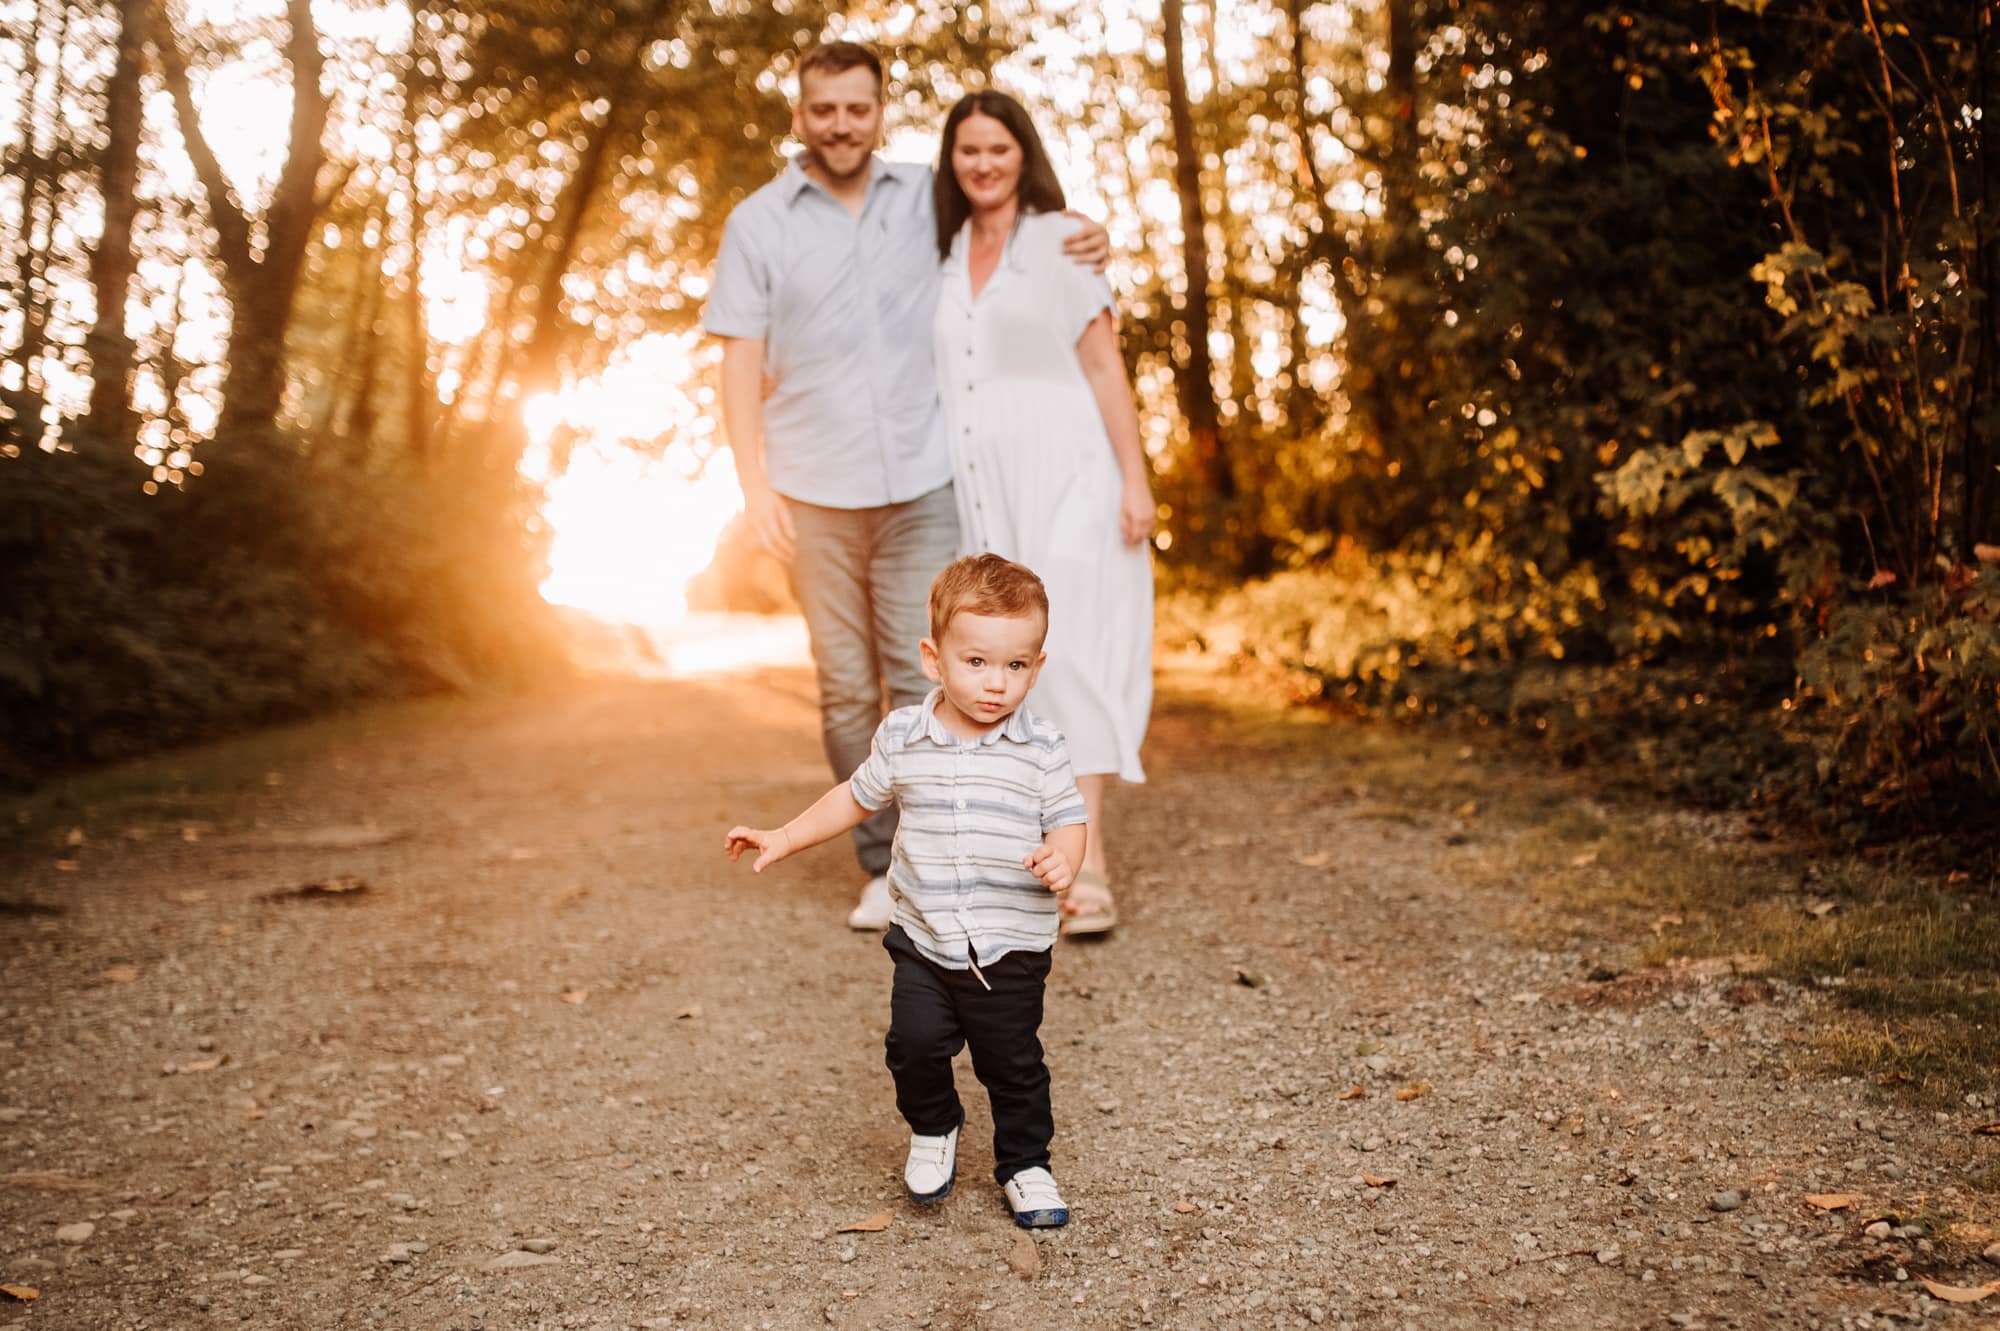 Sunset family photo session in Burnaby shows little boy walking ahead of his parents on road.